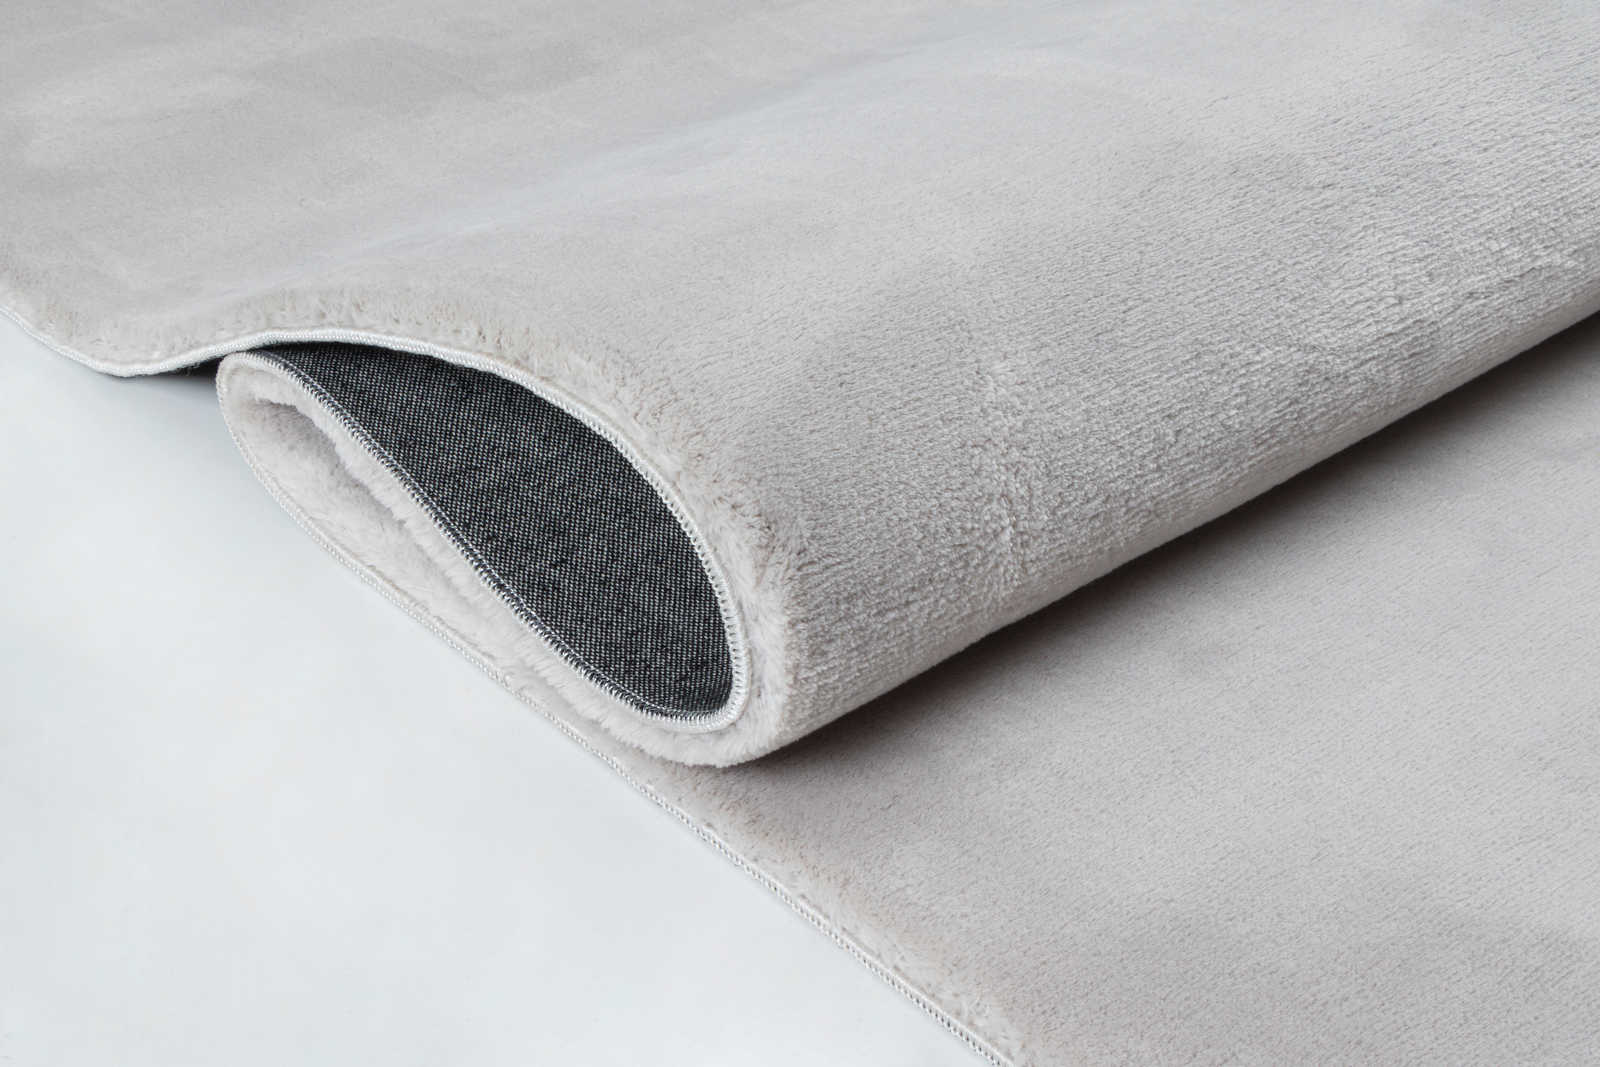             Cosy high pile carpet in soft grey - 110 x 60 cm
        